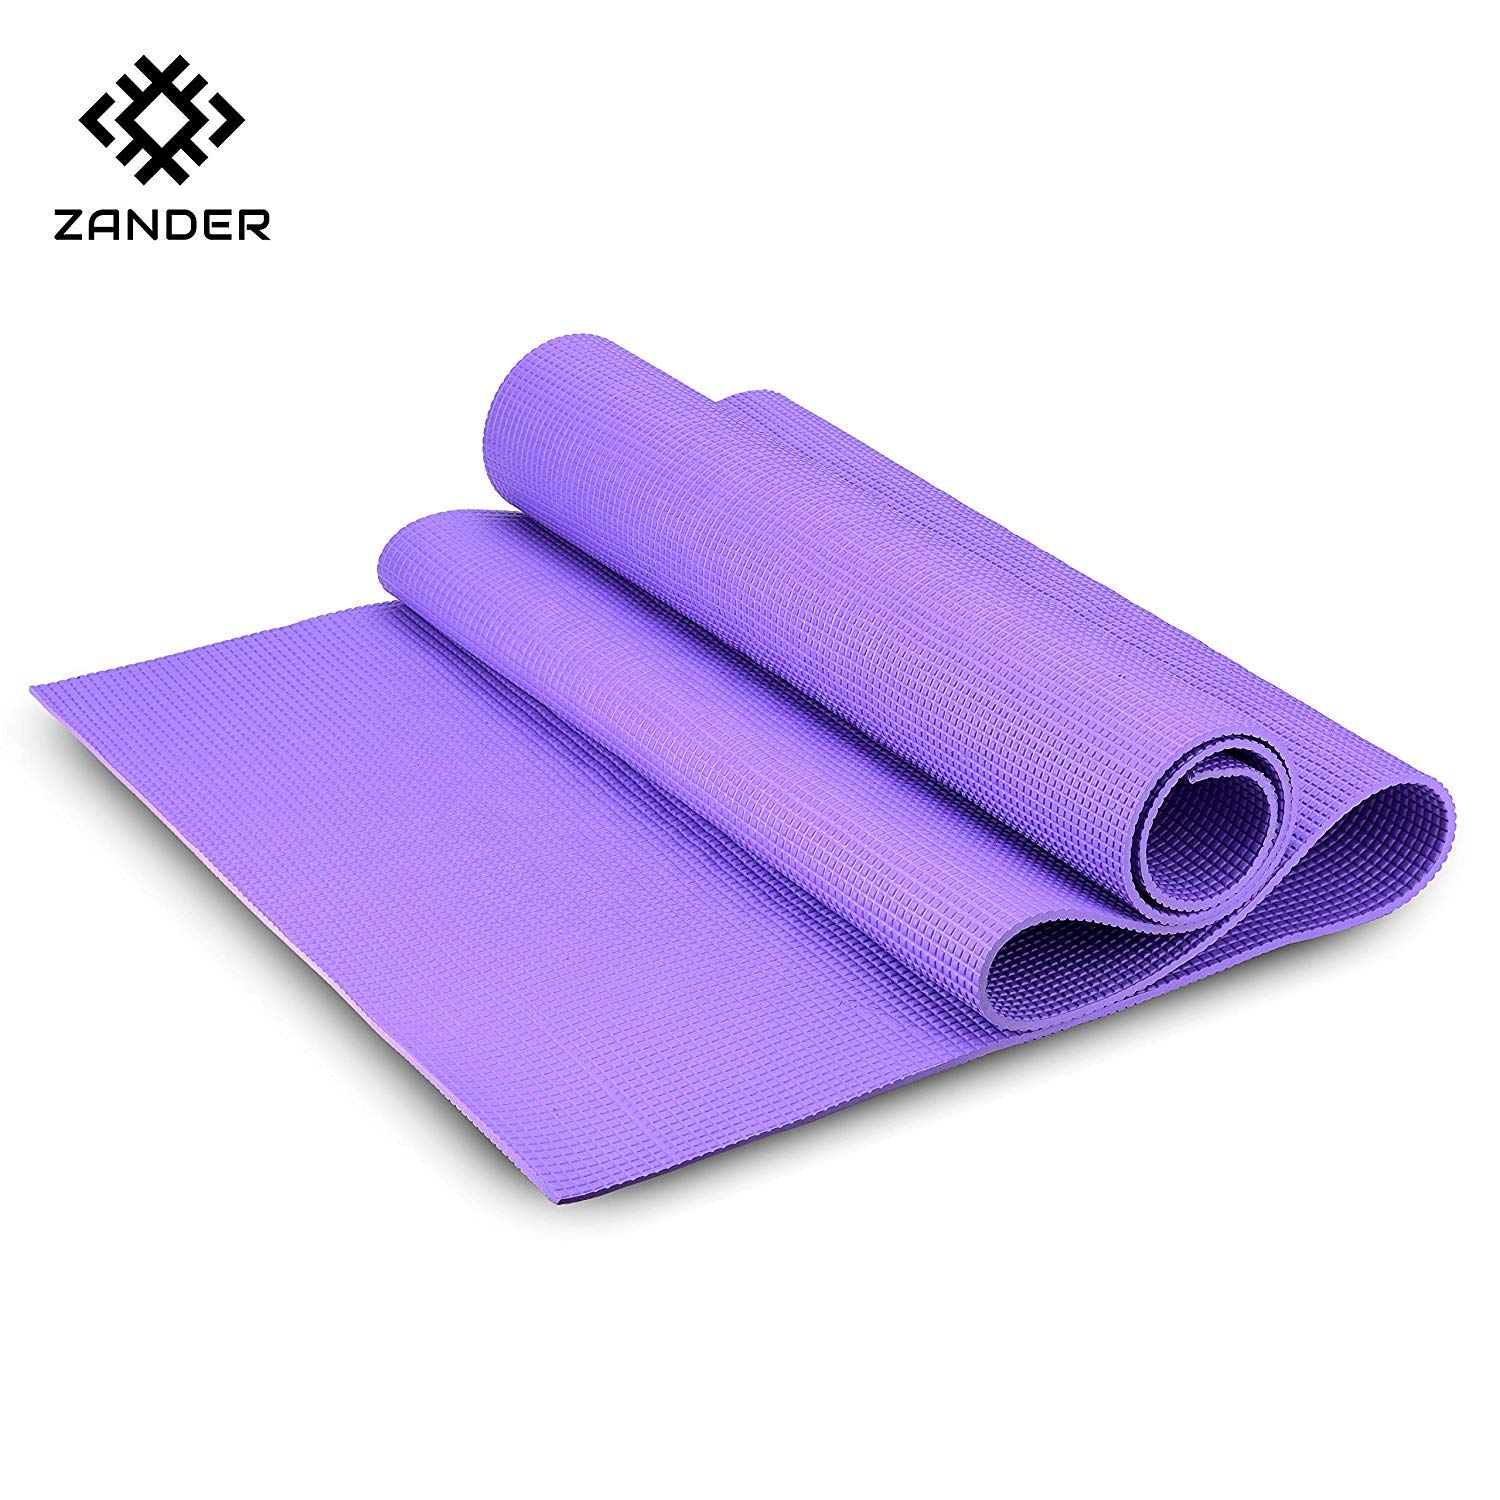 23+ Best Yoga Mats in India - With Price, Size and Color Options